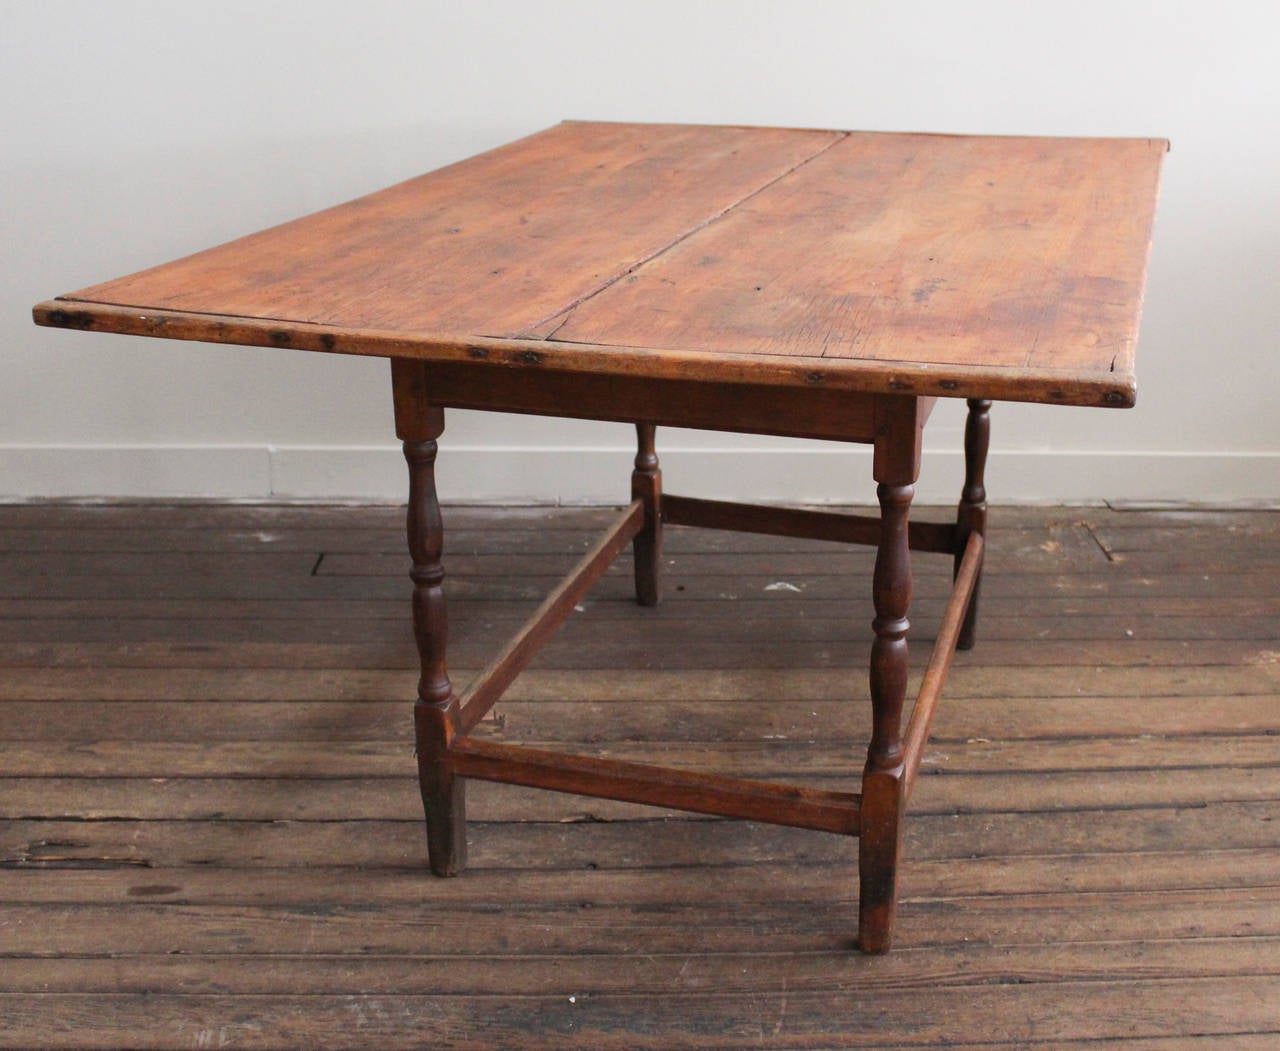 White Pine Double Board Table, 17th c Pennsylvania, with Breadboard Ends, Turned Legs and Stretcher Base.